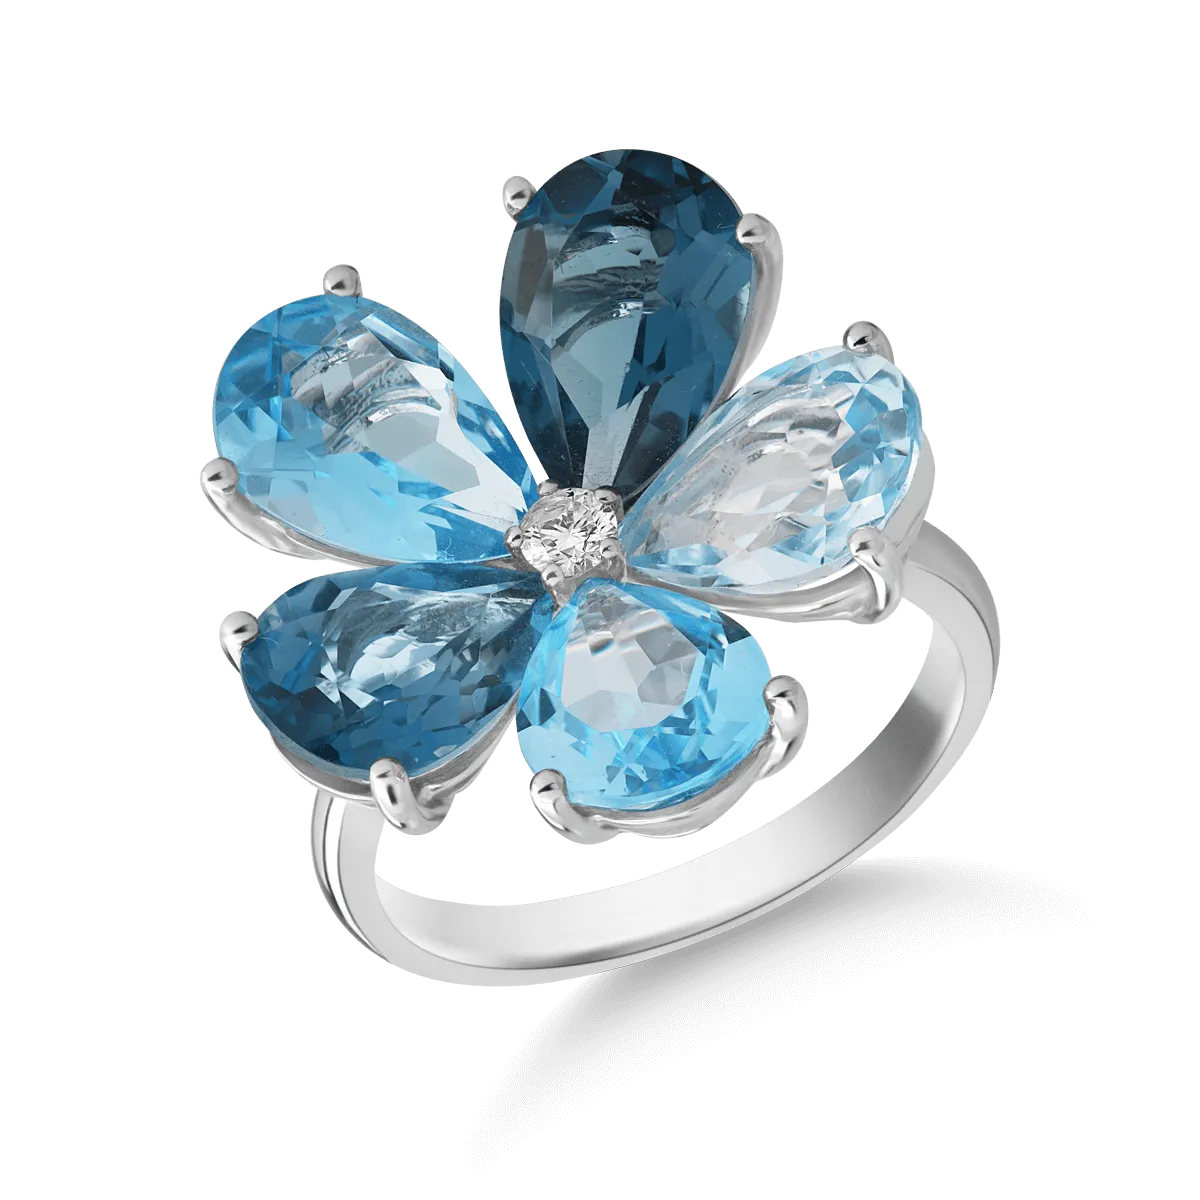 14K white gold flower ring with 11.9ct topaz and 0.08ct diamond